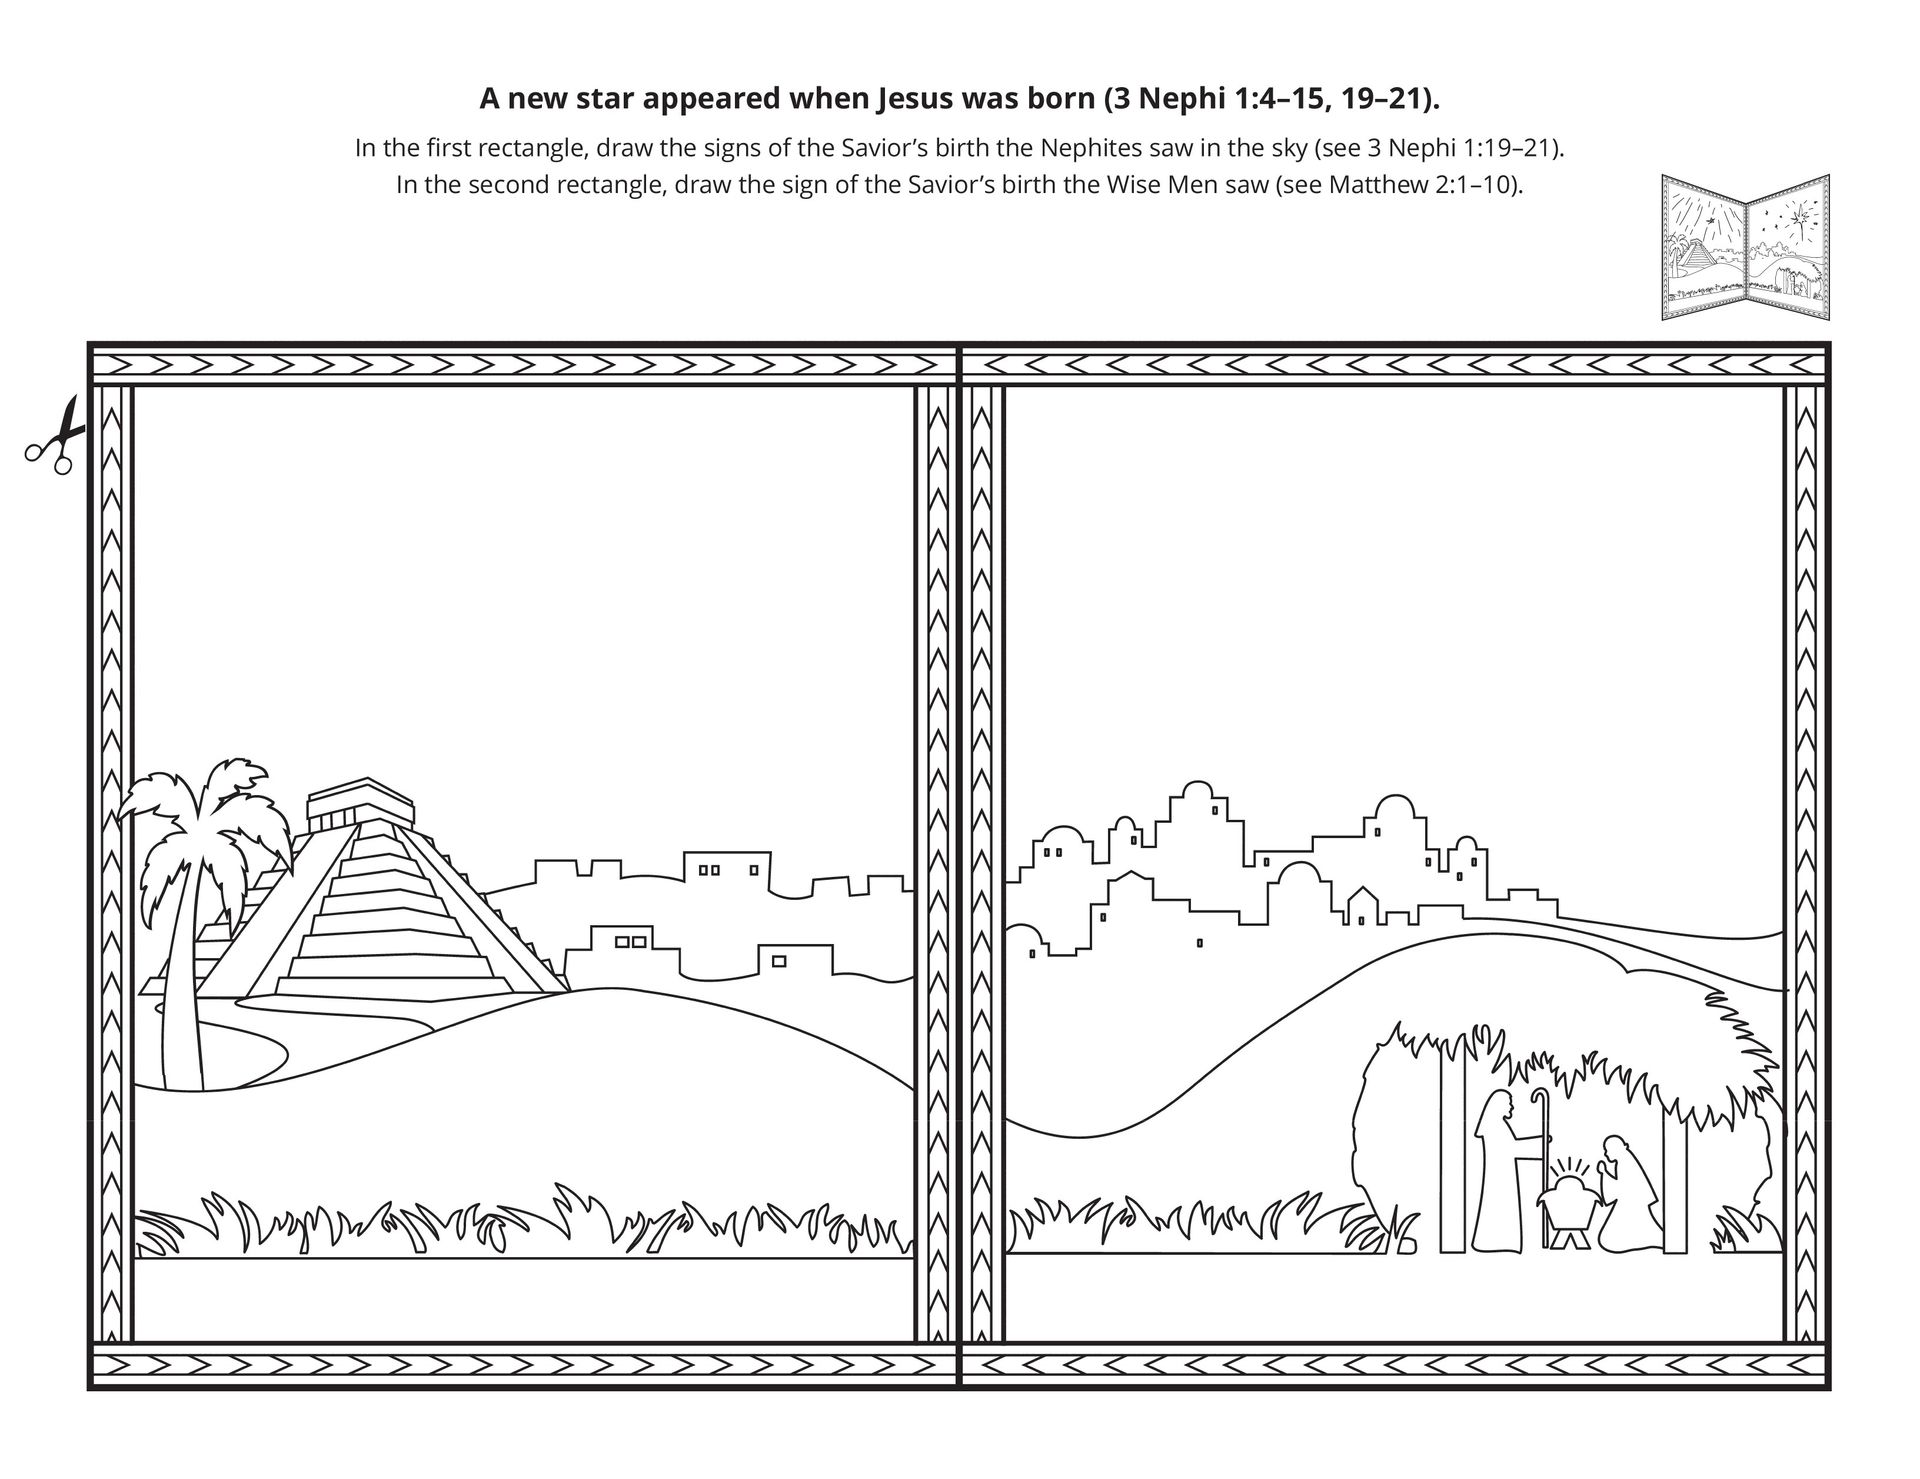 A line-art activity depicting the night the Savior was born.